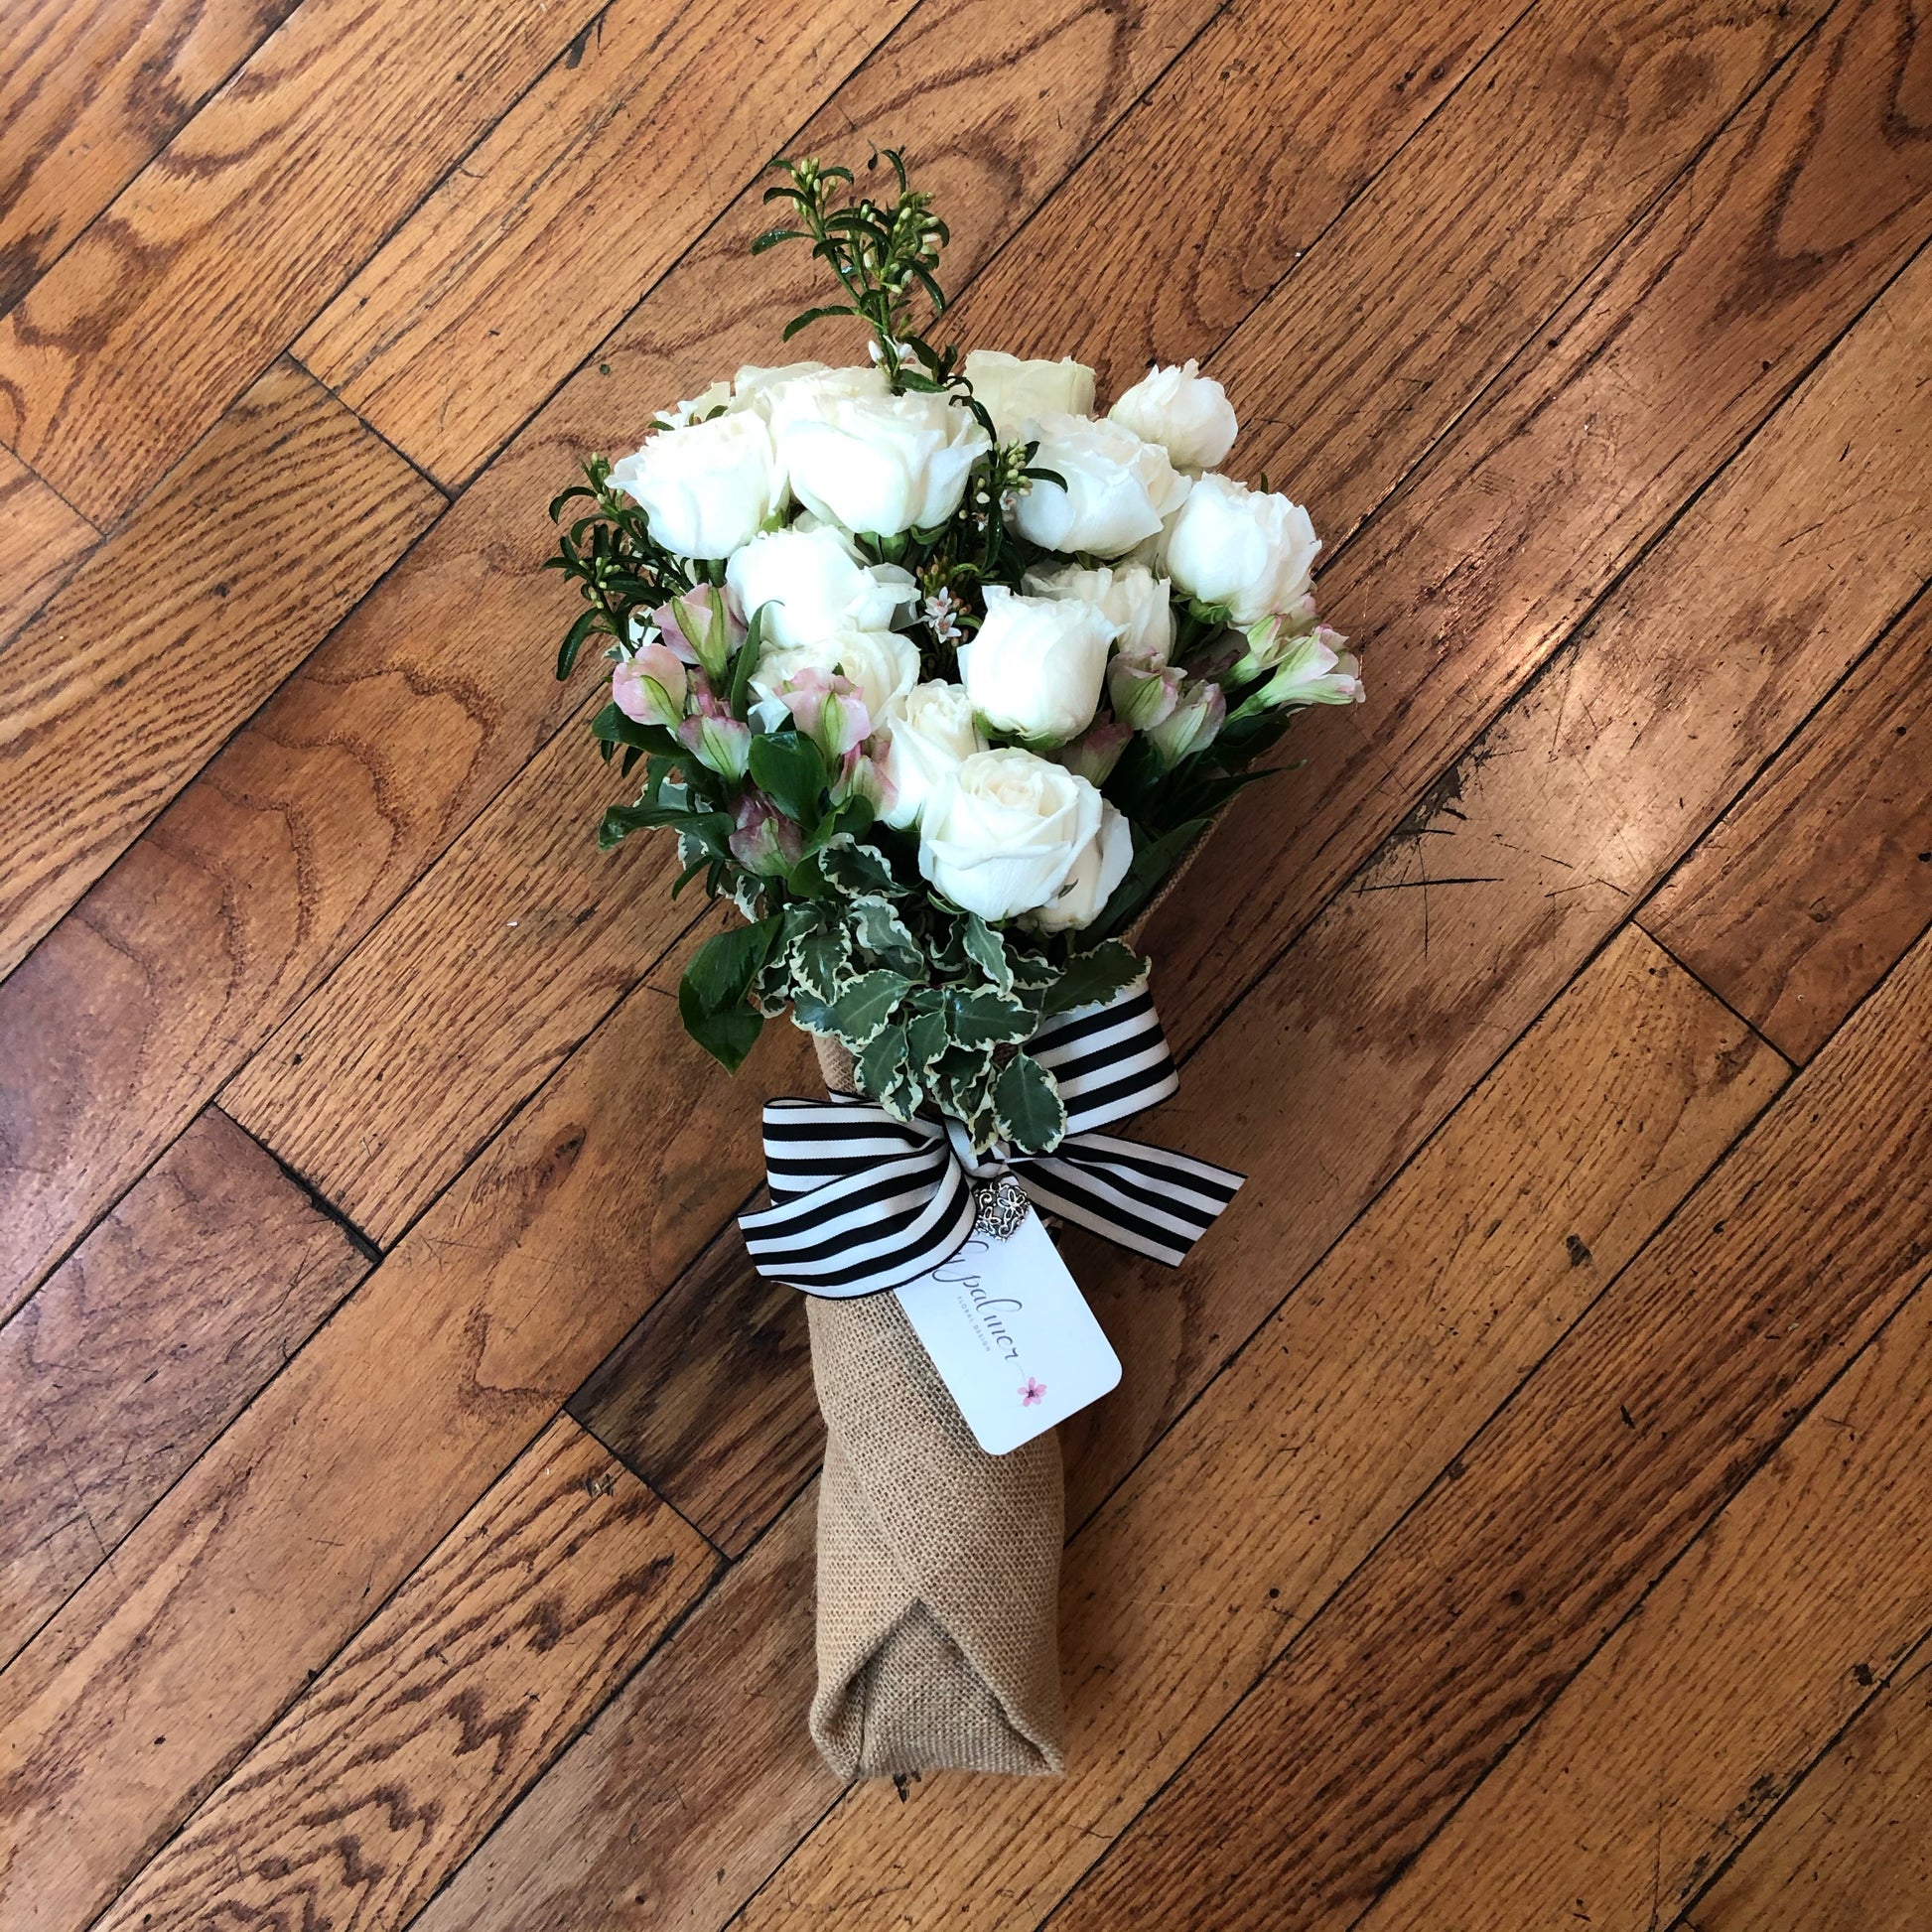 The Lily Wrap from Lily Palmer Flowers is filled with bunches of roses or seasonal flowers. The perfect gift for birthdays, special moments or just because.